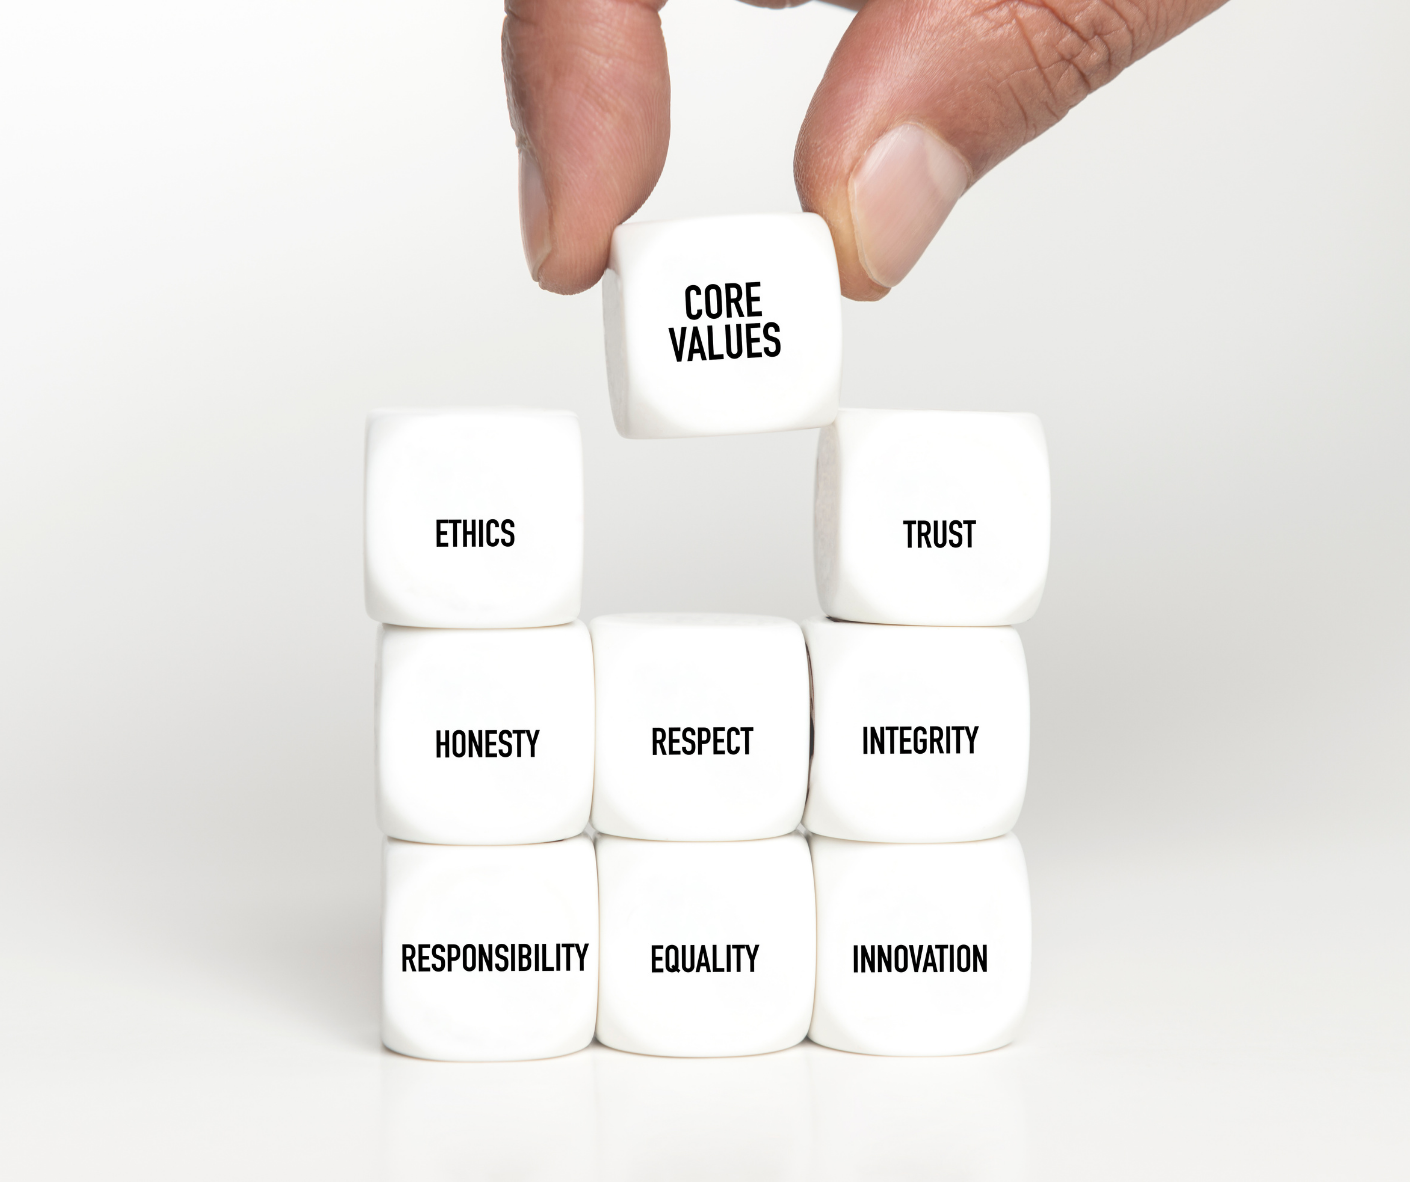 Validate Your Core Values